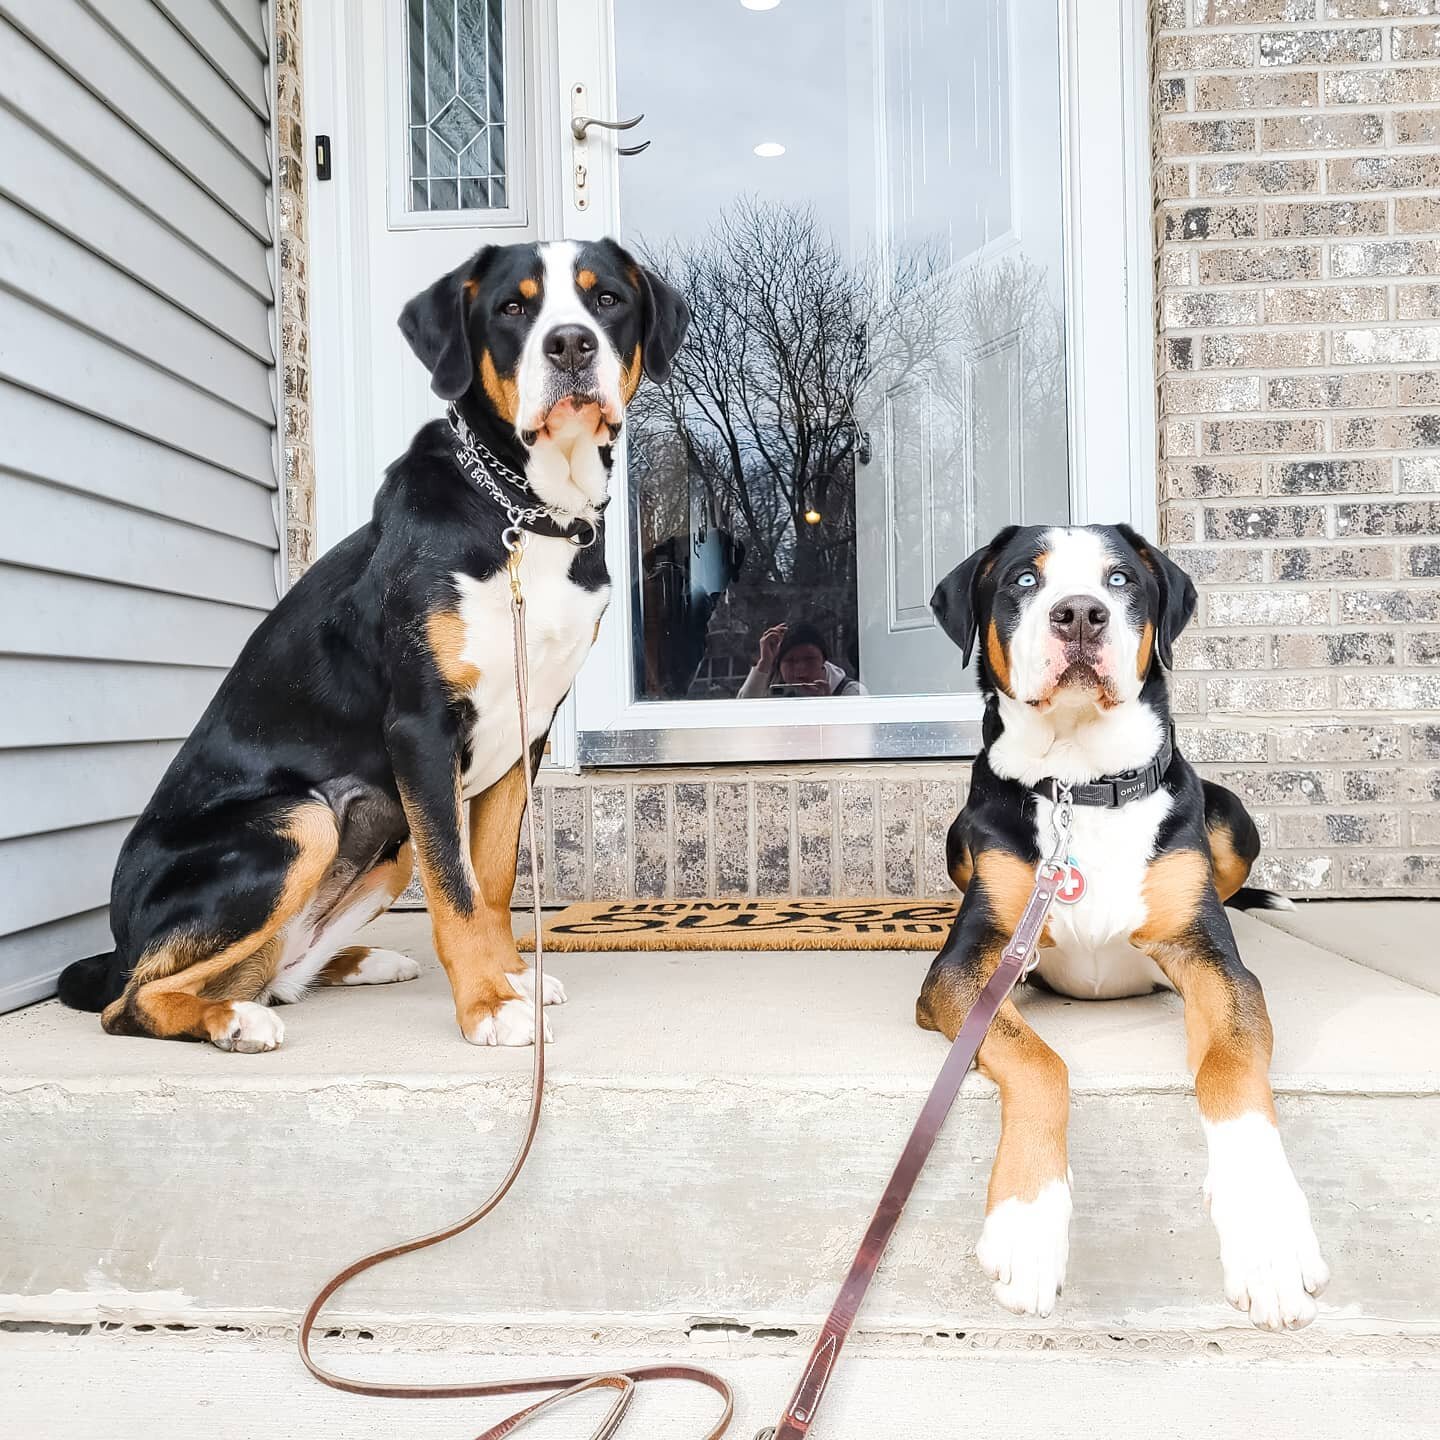 Happy Sunday! We are back after our little mini &quot;staycation&quot; and I'm feeling as recharged as ever. 🙌🏼 Paigey &amp; Bash are joining us for training - stay tuned for their introduction video tomorrow! ❤

#greaterswissmountaindogs